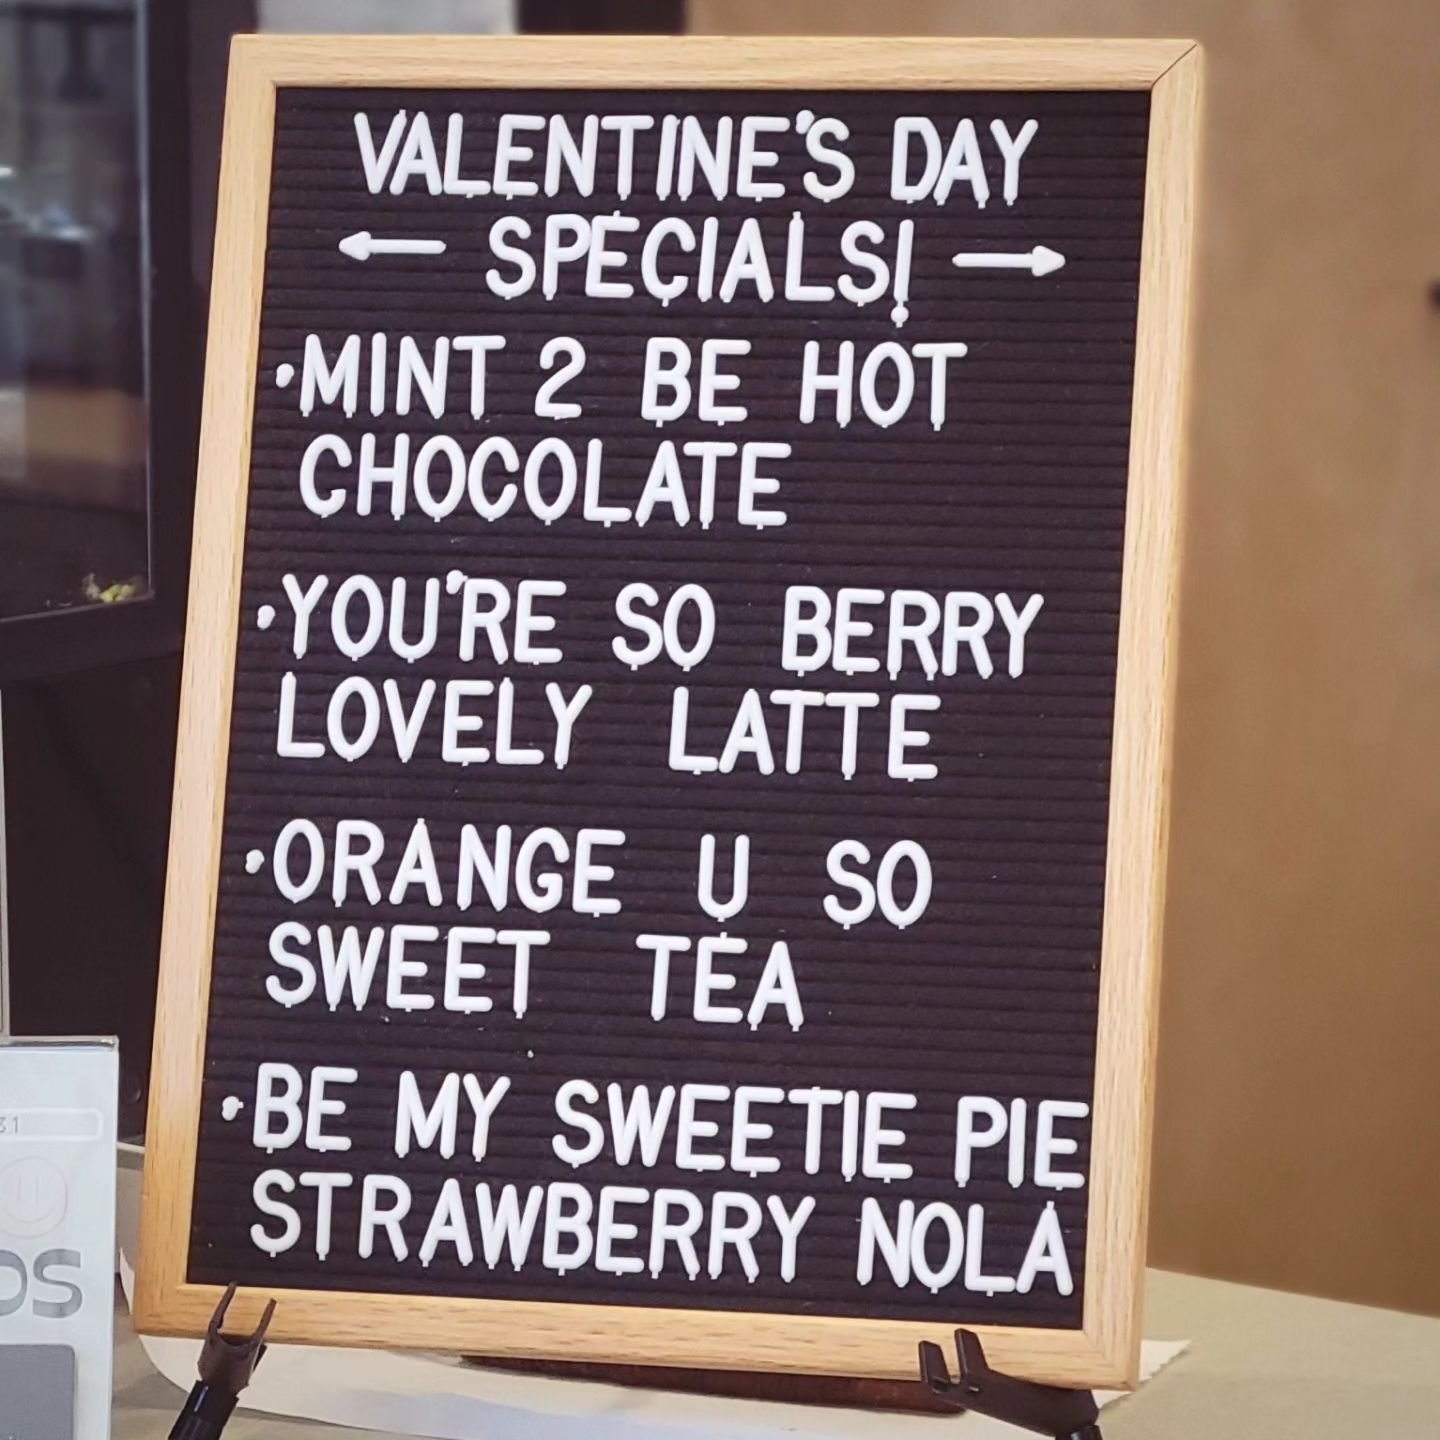 Come celebrate Valentines with a sweet VDay drink! 

#coffee #cafe1031 #Townsend #delaware #middletown #valentines #valentinesday2024 #chocolatecoveredstrawberries #sweettea #hotchocolate  #latte #coldbrew